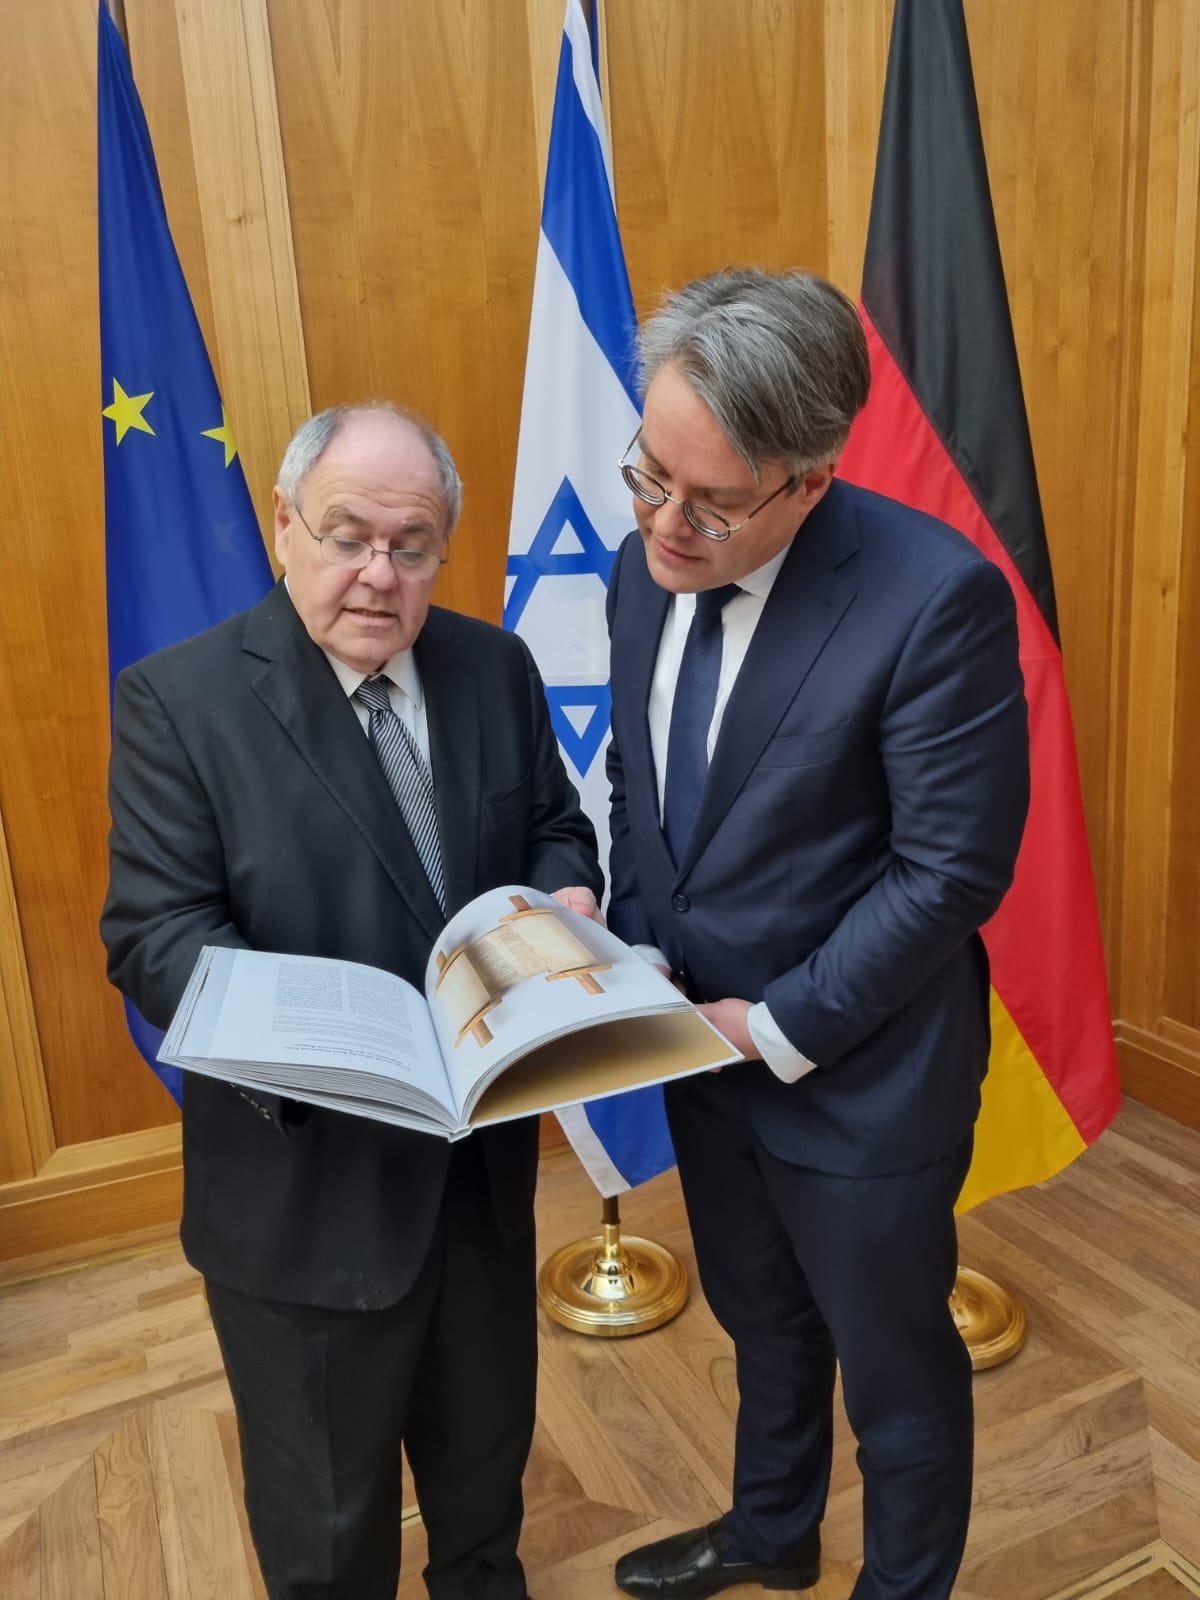 Dani Dayan presents a catalog of artifacts from the Yad Vashem Synagogue to the Minister of State at the Federal Foreign Office, Tobias Lindner